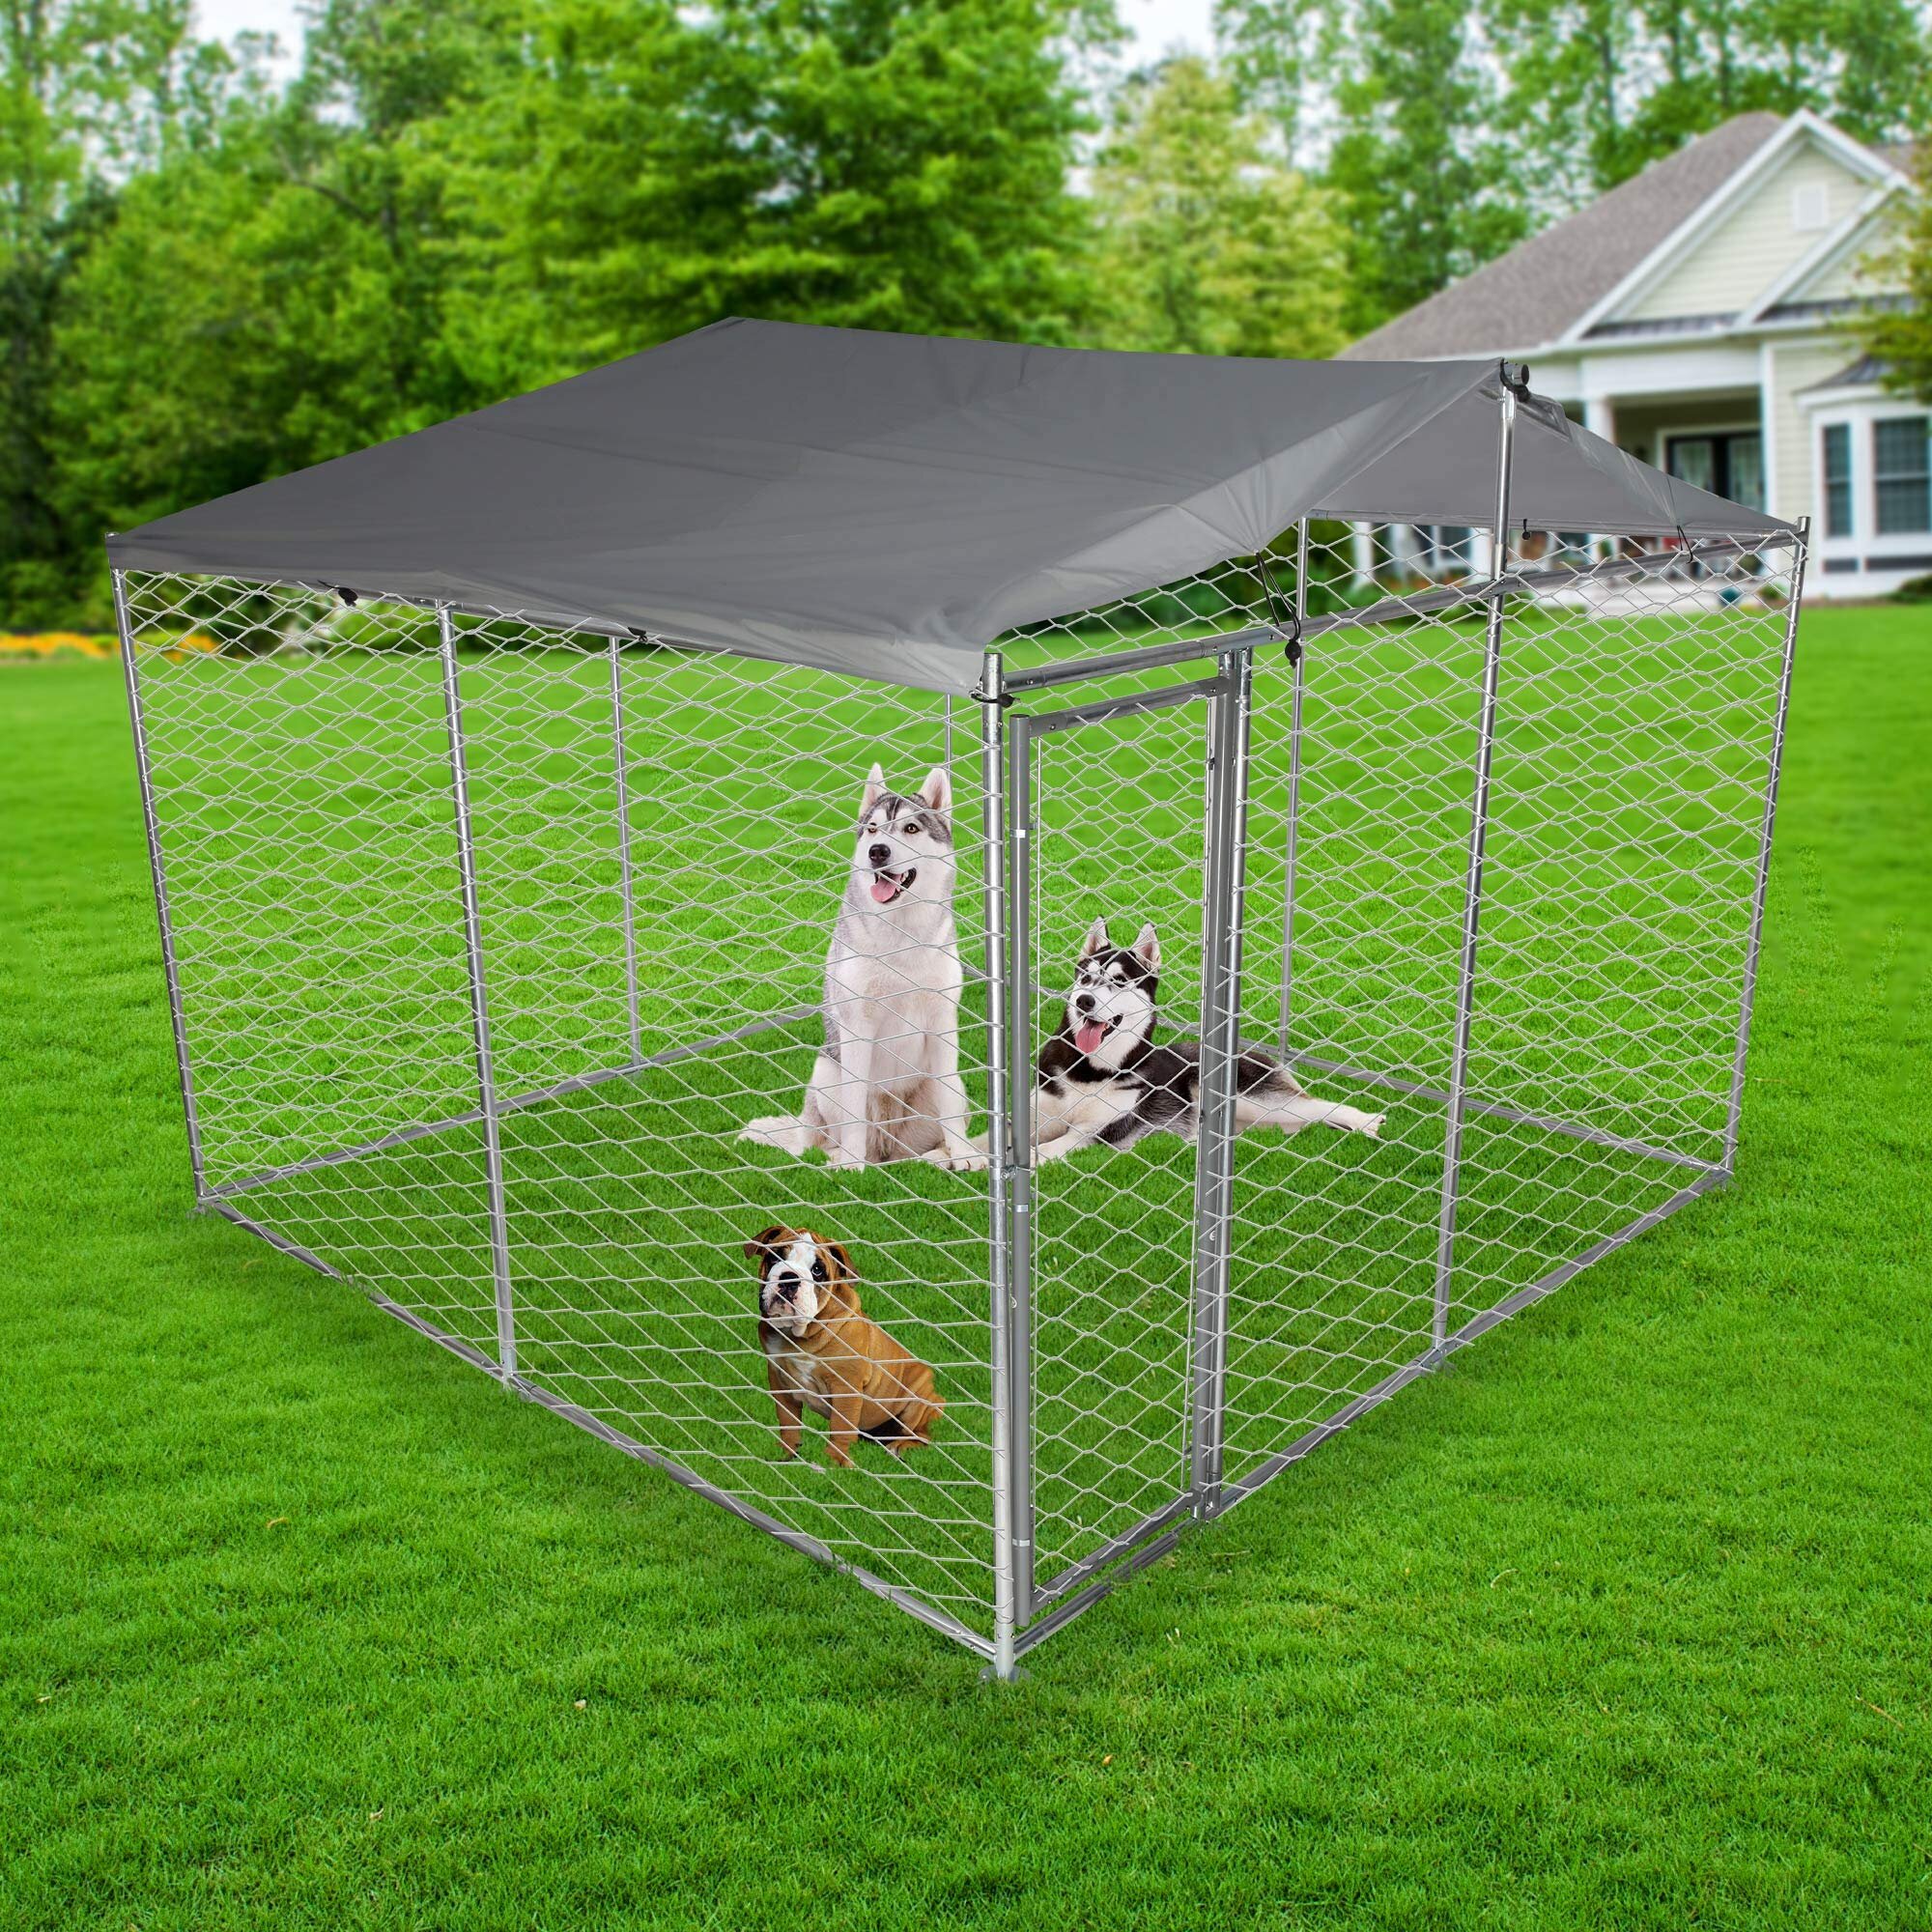 LUCKYERMORE Metal Dog Kennel Outdoor for Large Dog Easy to Clean & Rust-Resistance Dog Crate with Lockable Dog Gate with/Without Water Resistance Cover 